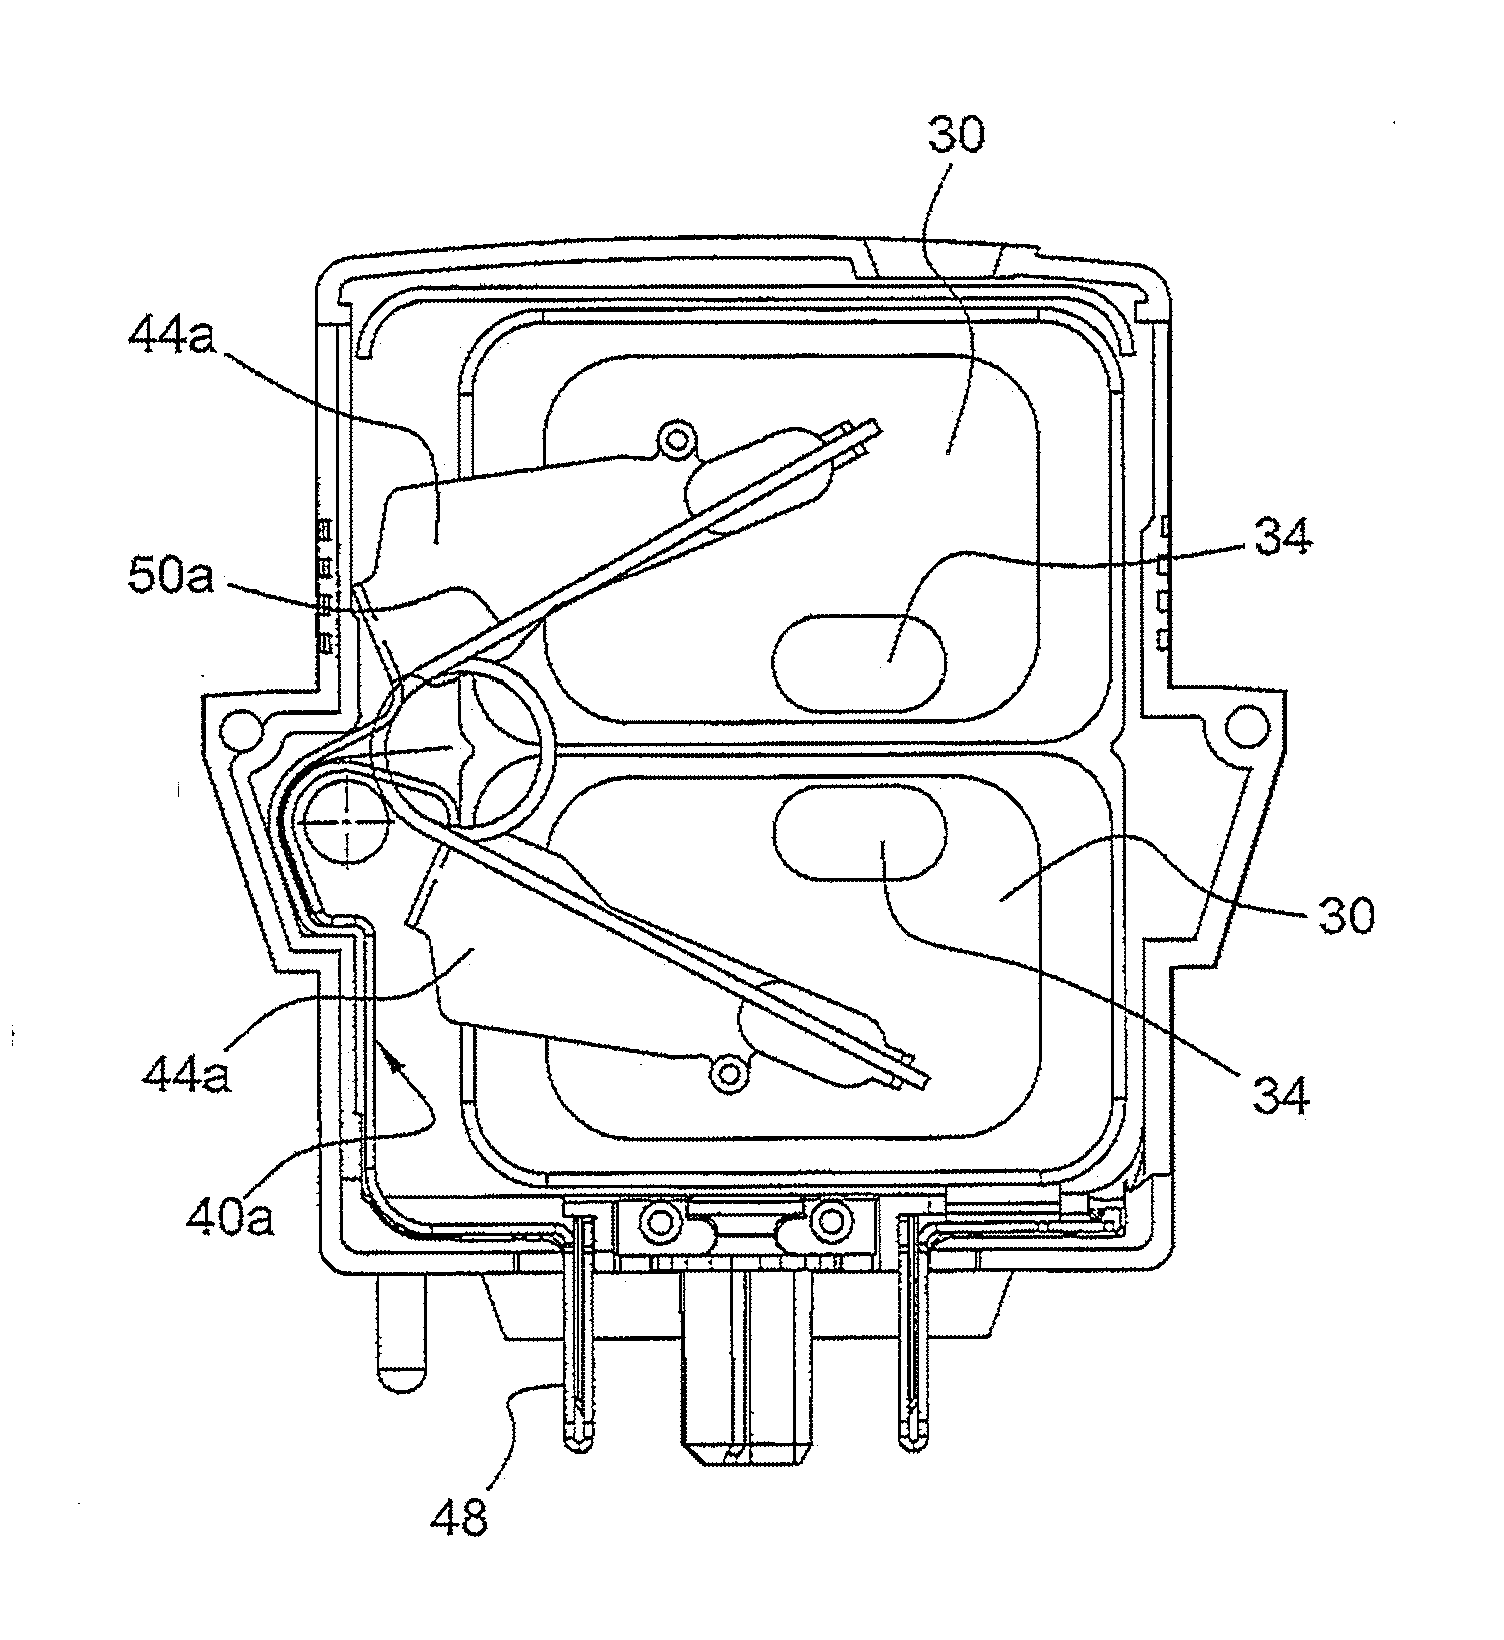 Varistor comprising an electrode having a protruding portion forming a pole and protection device comprising such a varistor